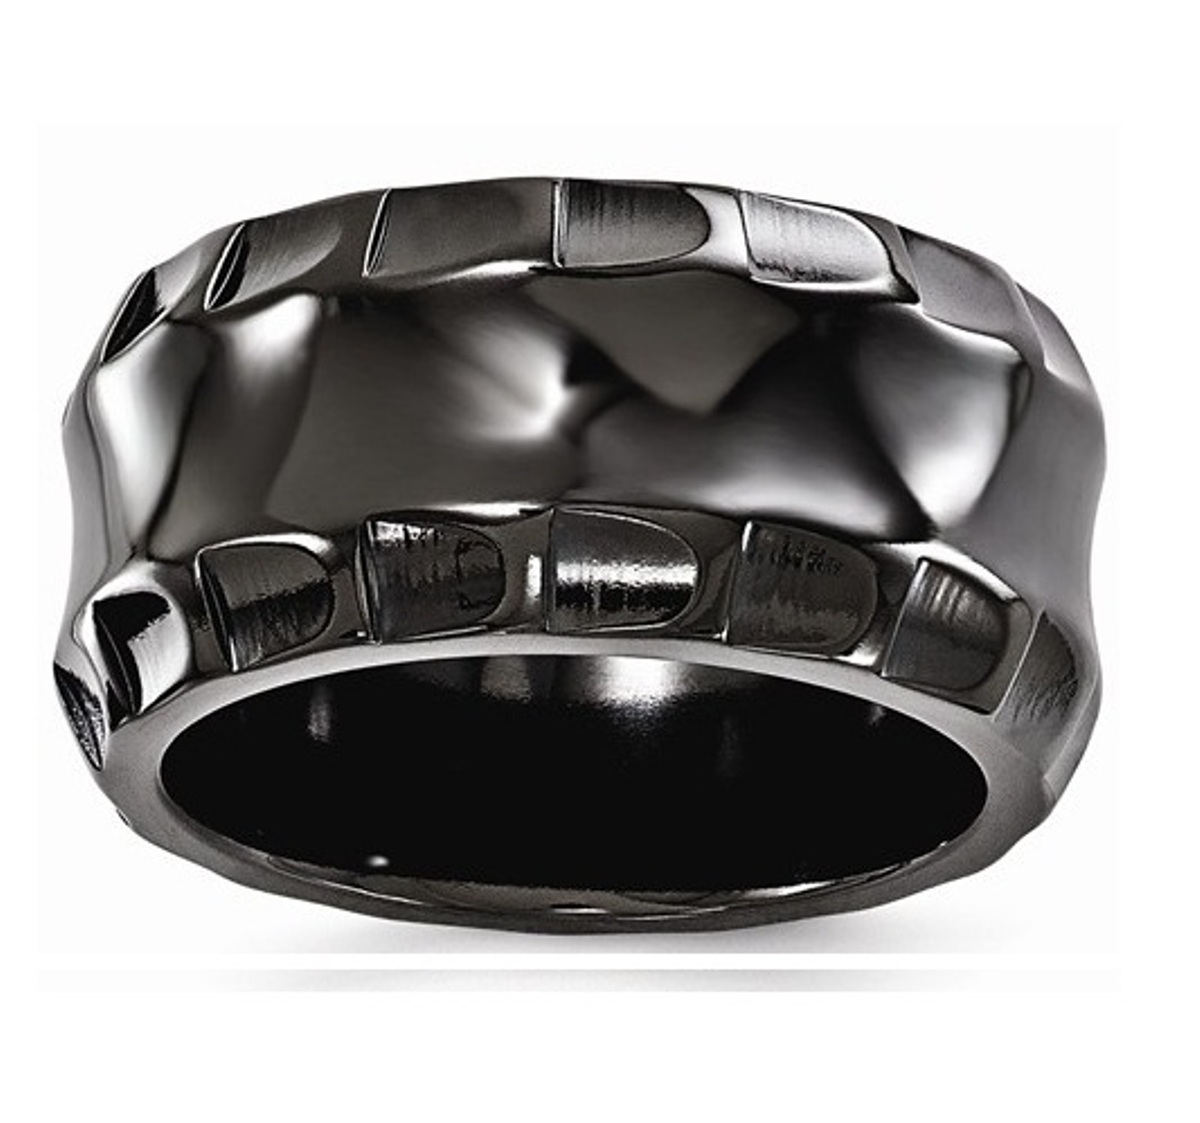  Black Ti Faceted Edges Polished 12mm Ring
